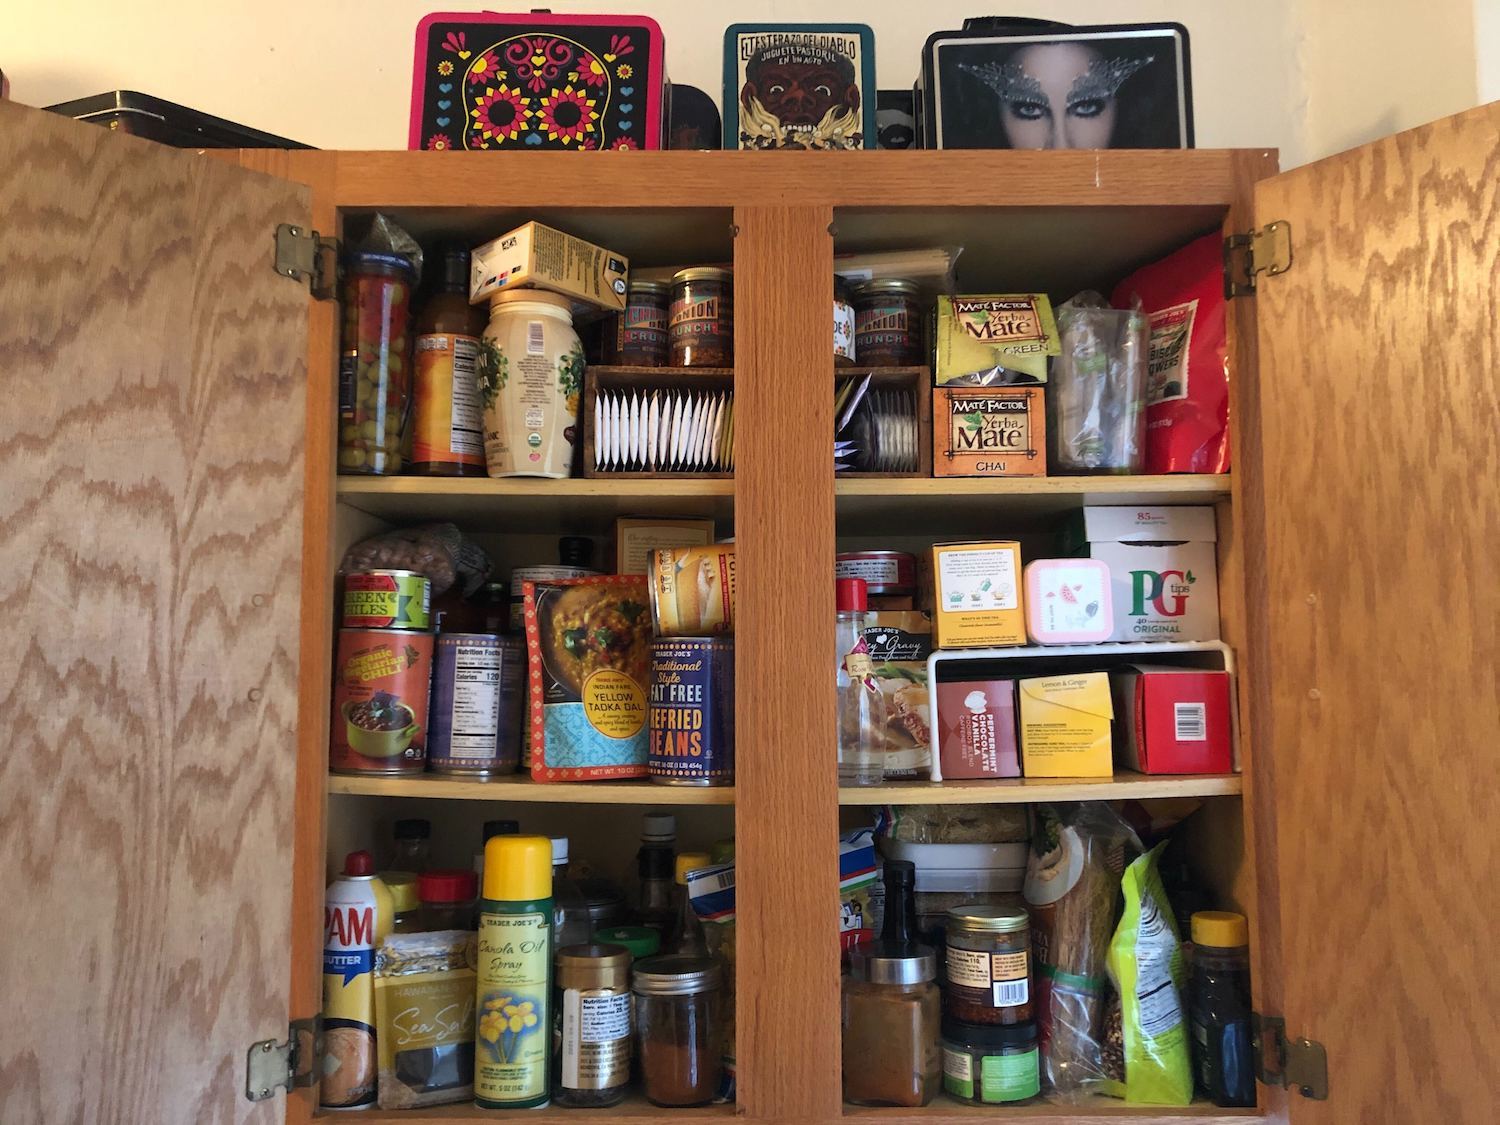 Zena Tsarfin and her partner's pantry is stocked with metal lunch boxes on the top. November 2020